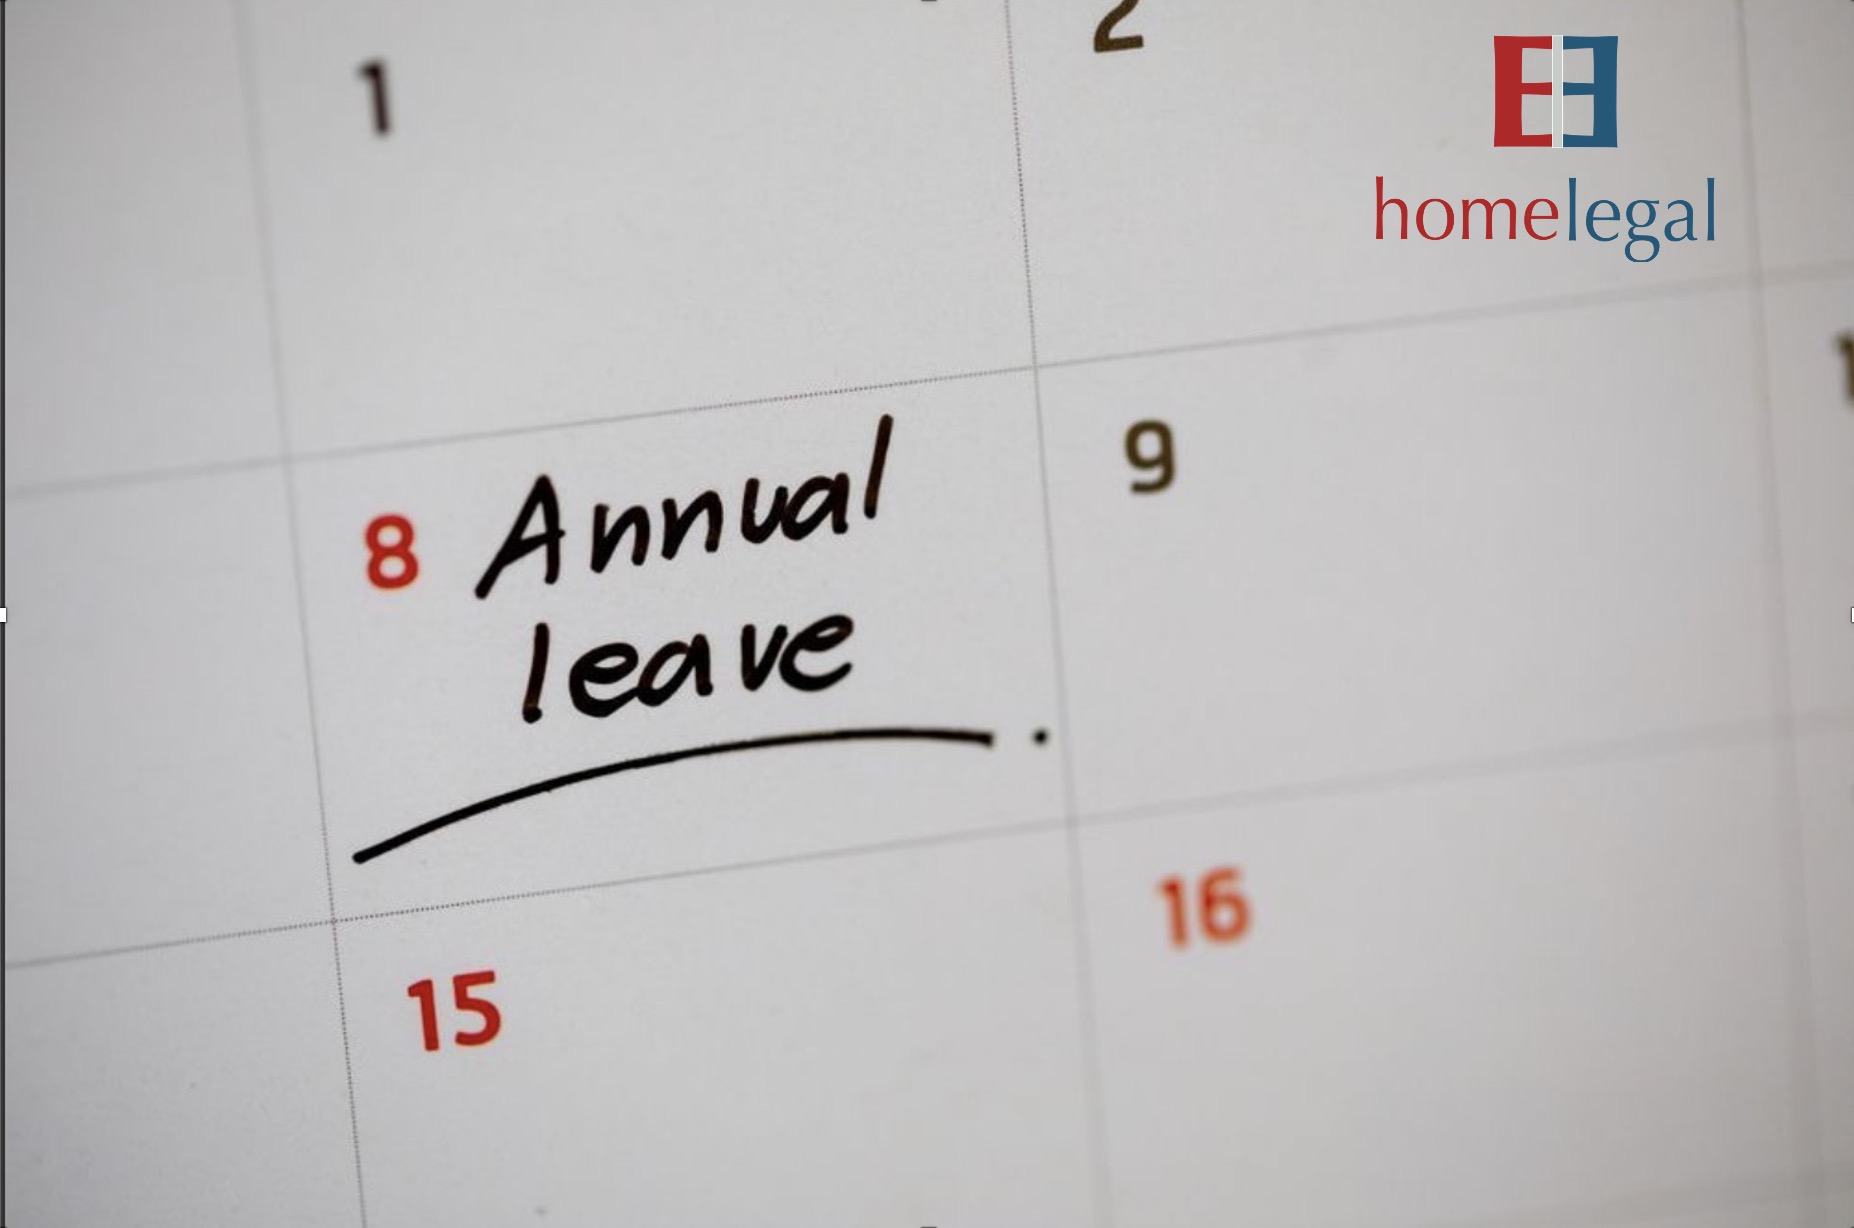 How many days of annual leave does an employee have?